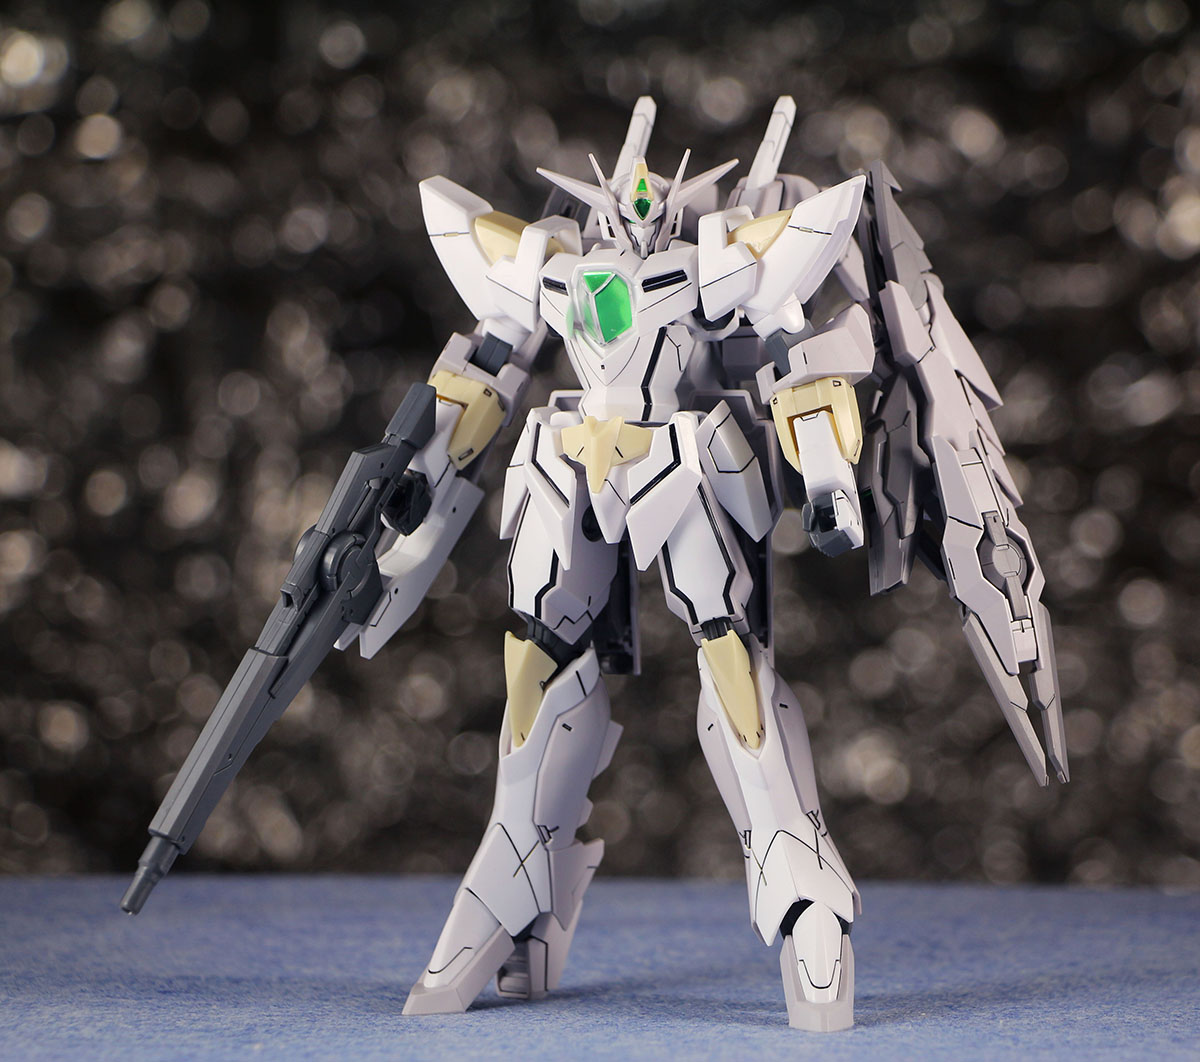 weapons of HGBF 1/144 Reversible Gundam picture 3